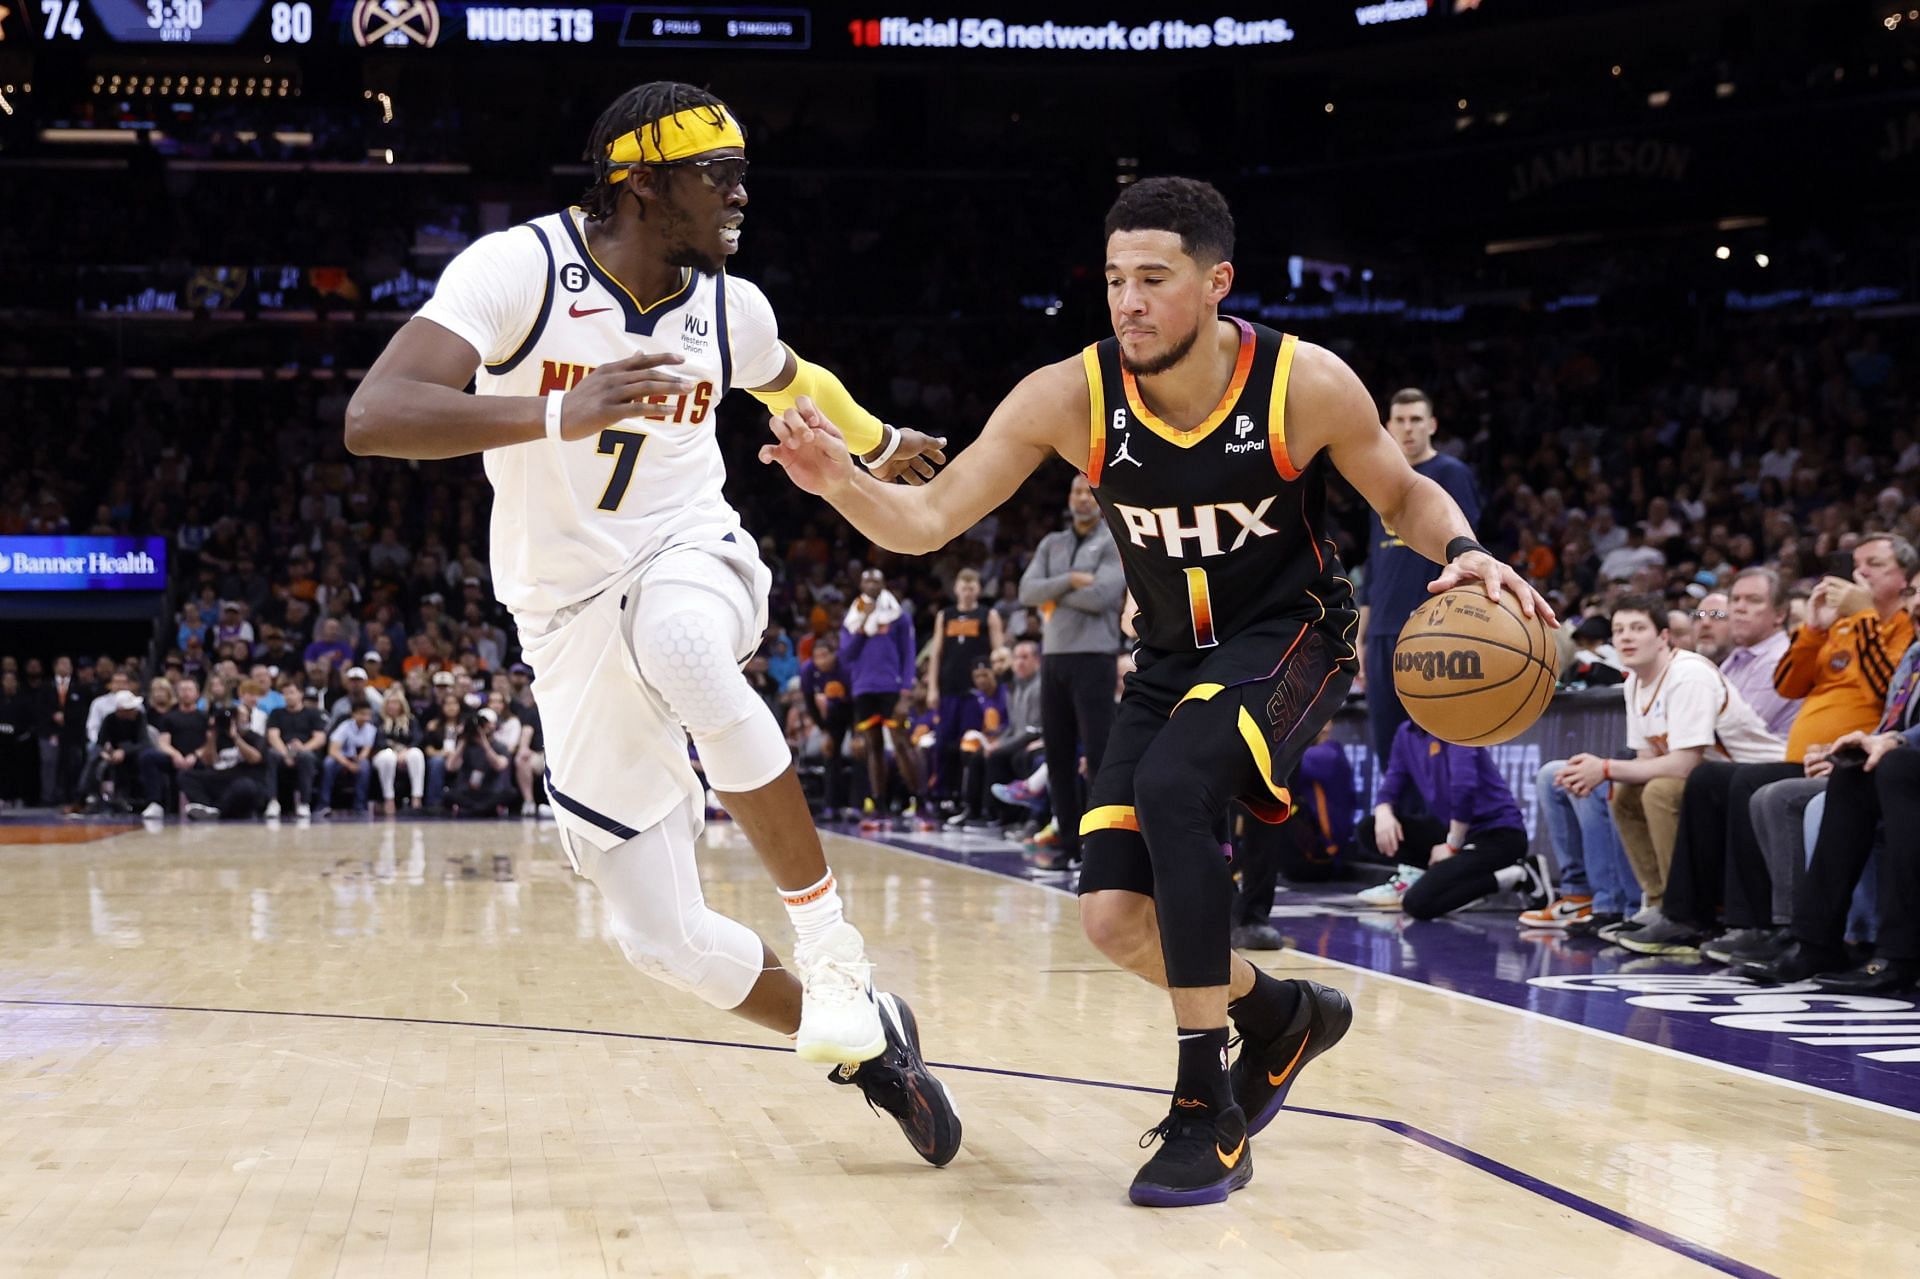 Devin Booker of the Phoenix Suns against the Denver Nuggets.